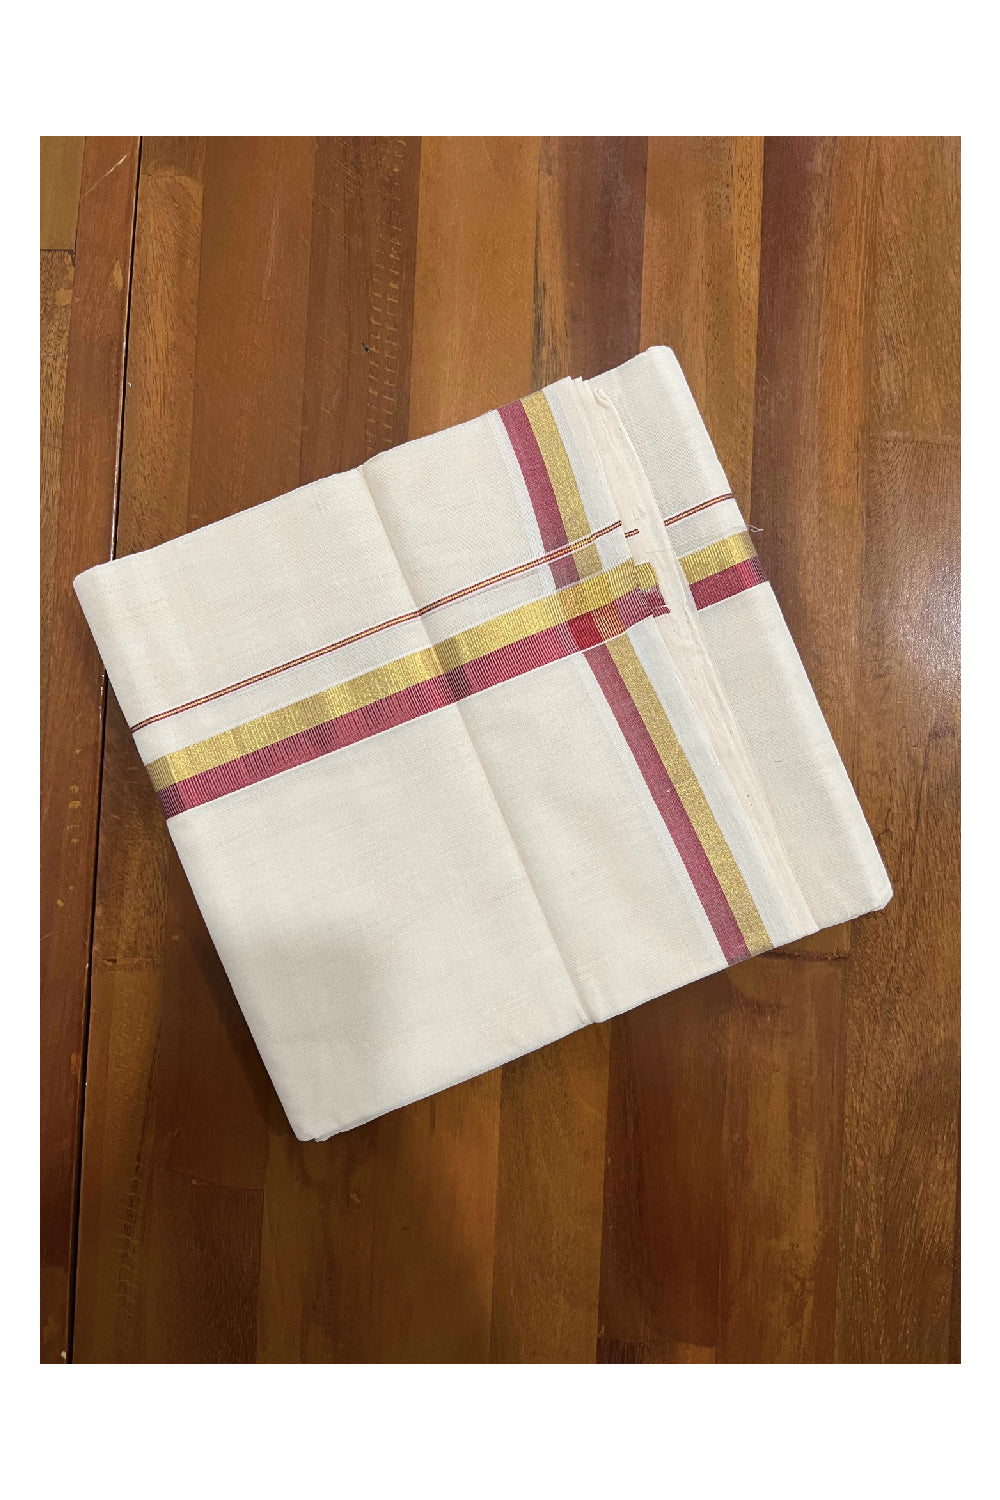 Southloom Kuthampully Pure Cotton Handloom Mundu with Golden and Red Kasavu Border